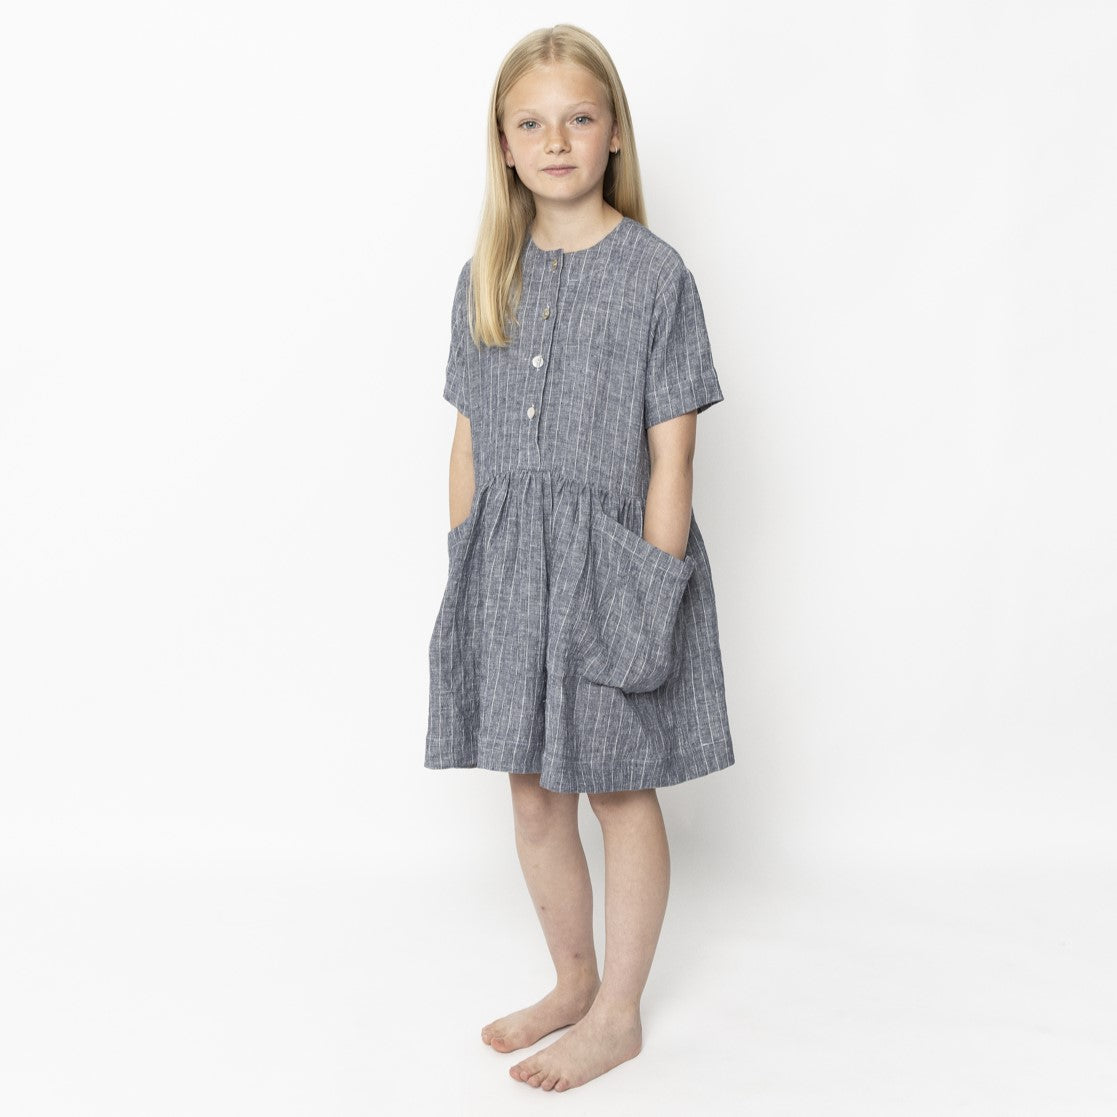 【AS WE GROW】Pocket dress Pinstriped denim ワンピース 6-18m,18-36m,3-5y  | Coucoubebe/ククベベ